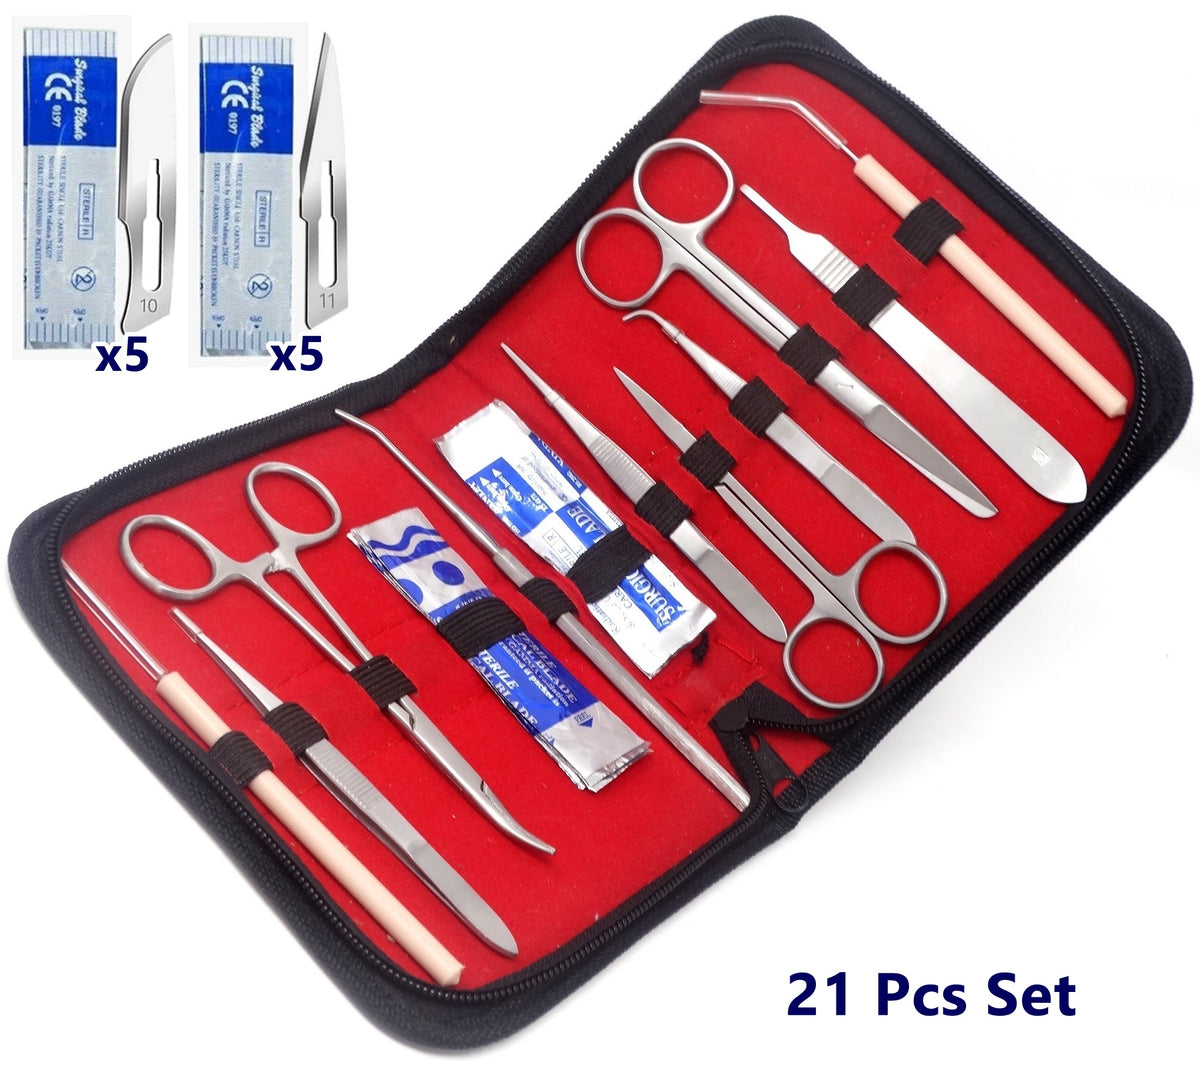 54 Pieces/Set Jewelry Making Tools Kit Pliers Scissors Tweezers for Beading Crafting with Case